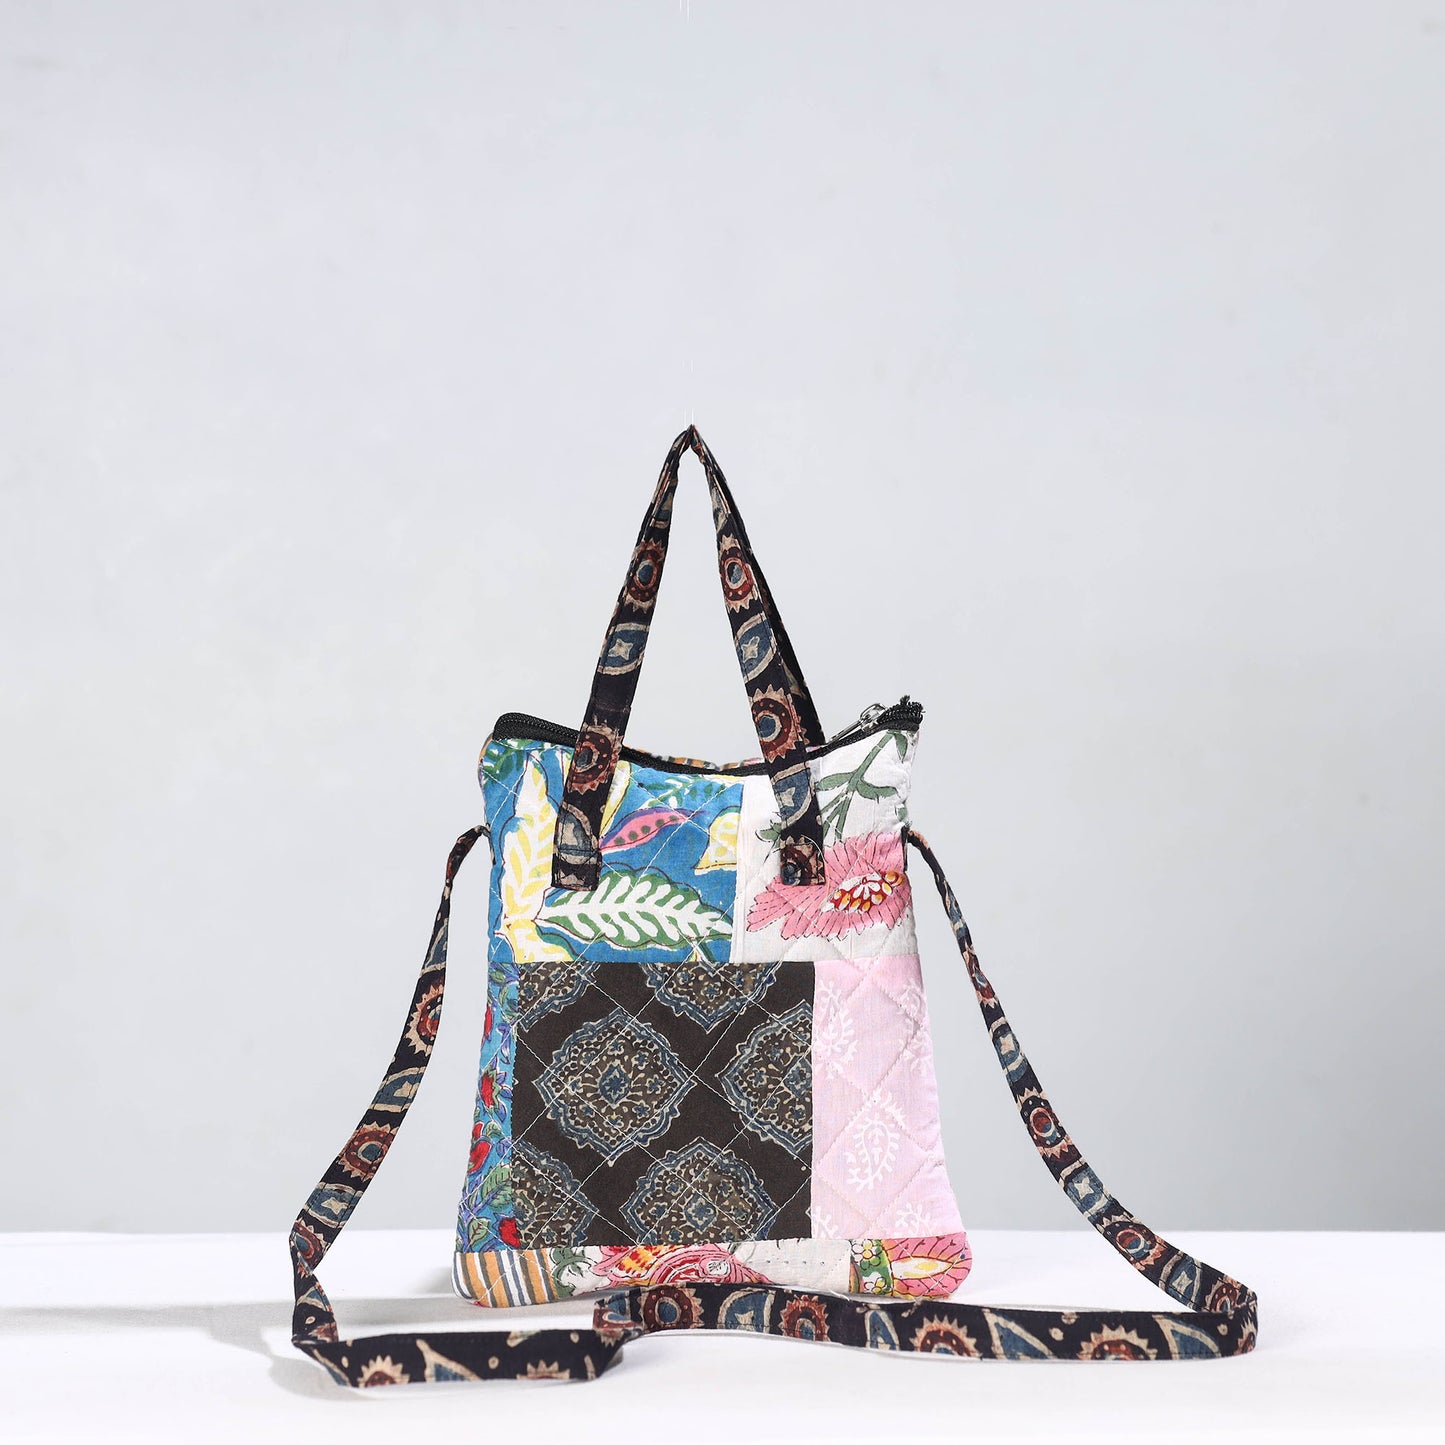 Handmade Quilted Cotton Patchwork Sling Bag 44